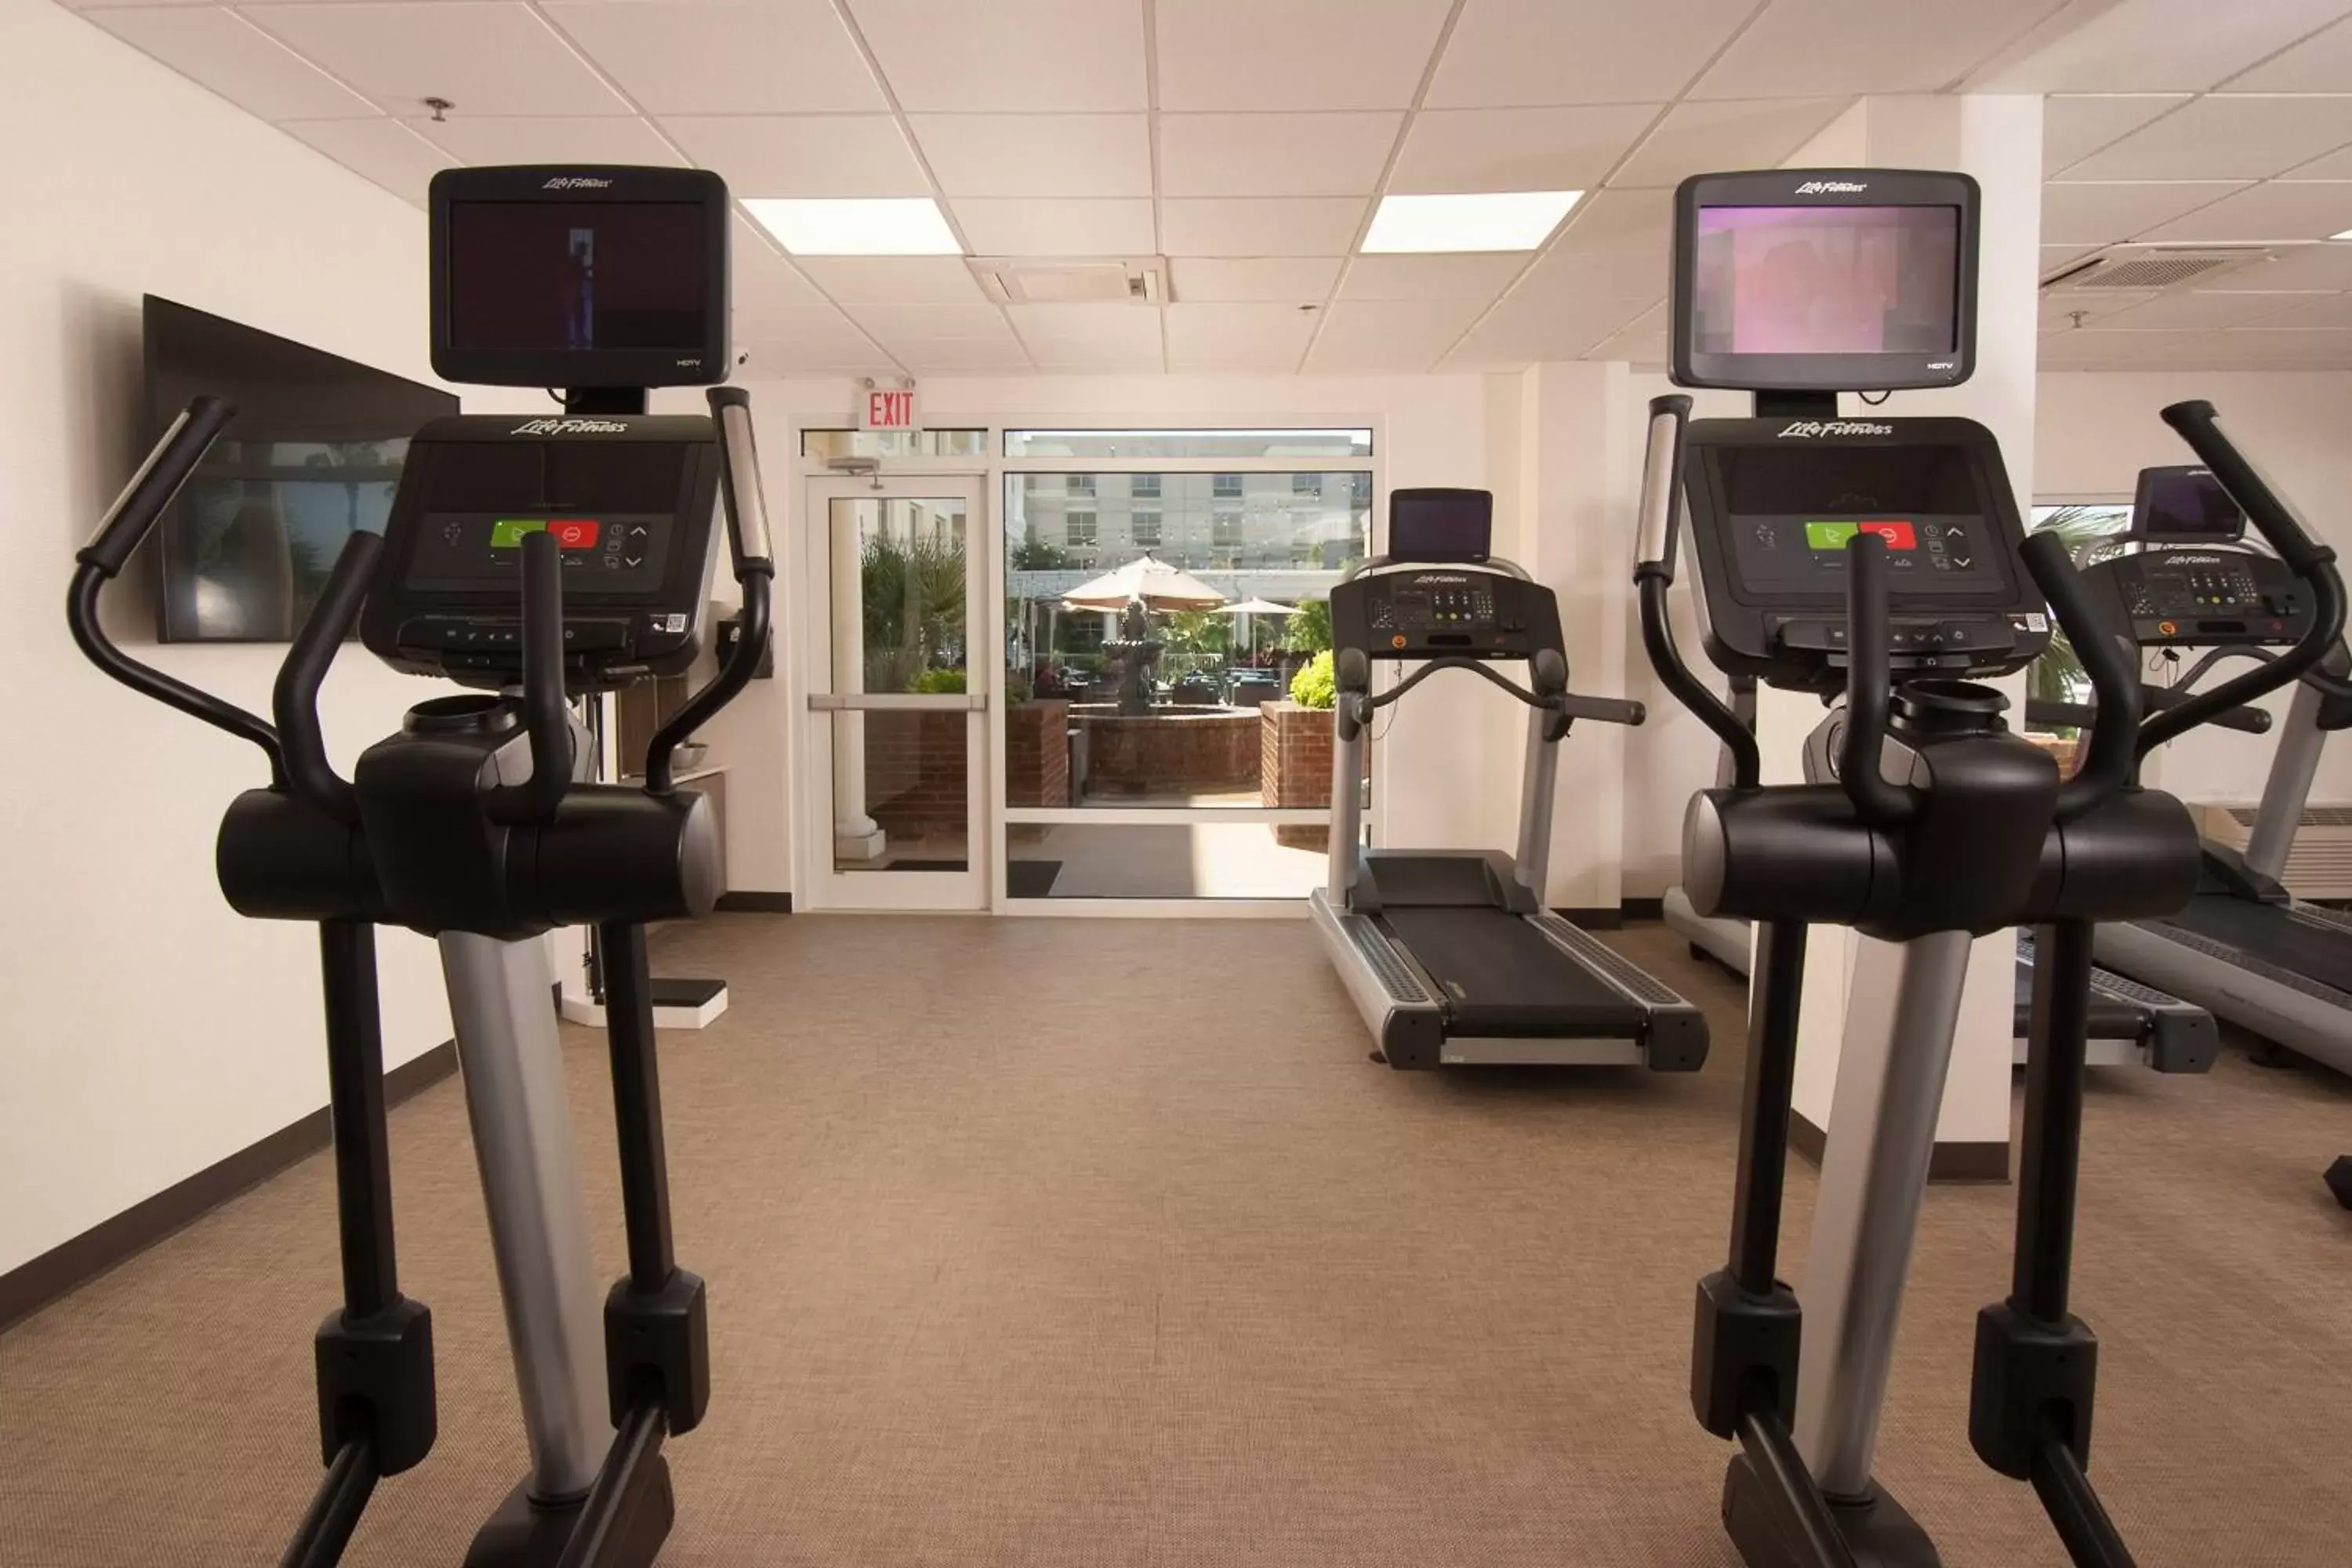 Fitness centre/facilities, Fitness Center/Facilities in Courtyard Charleston Waterfront